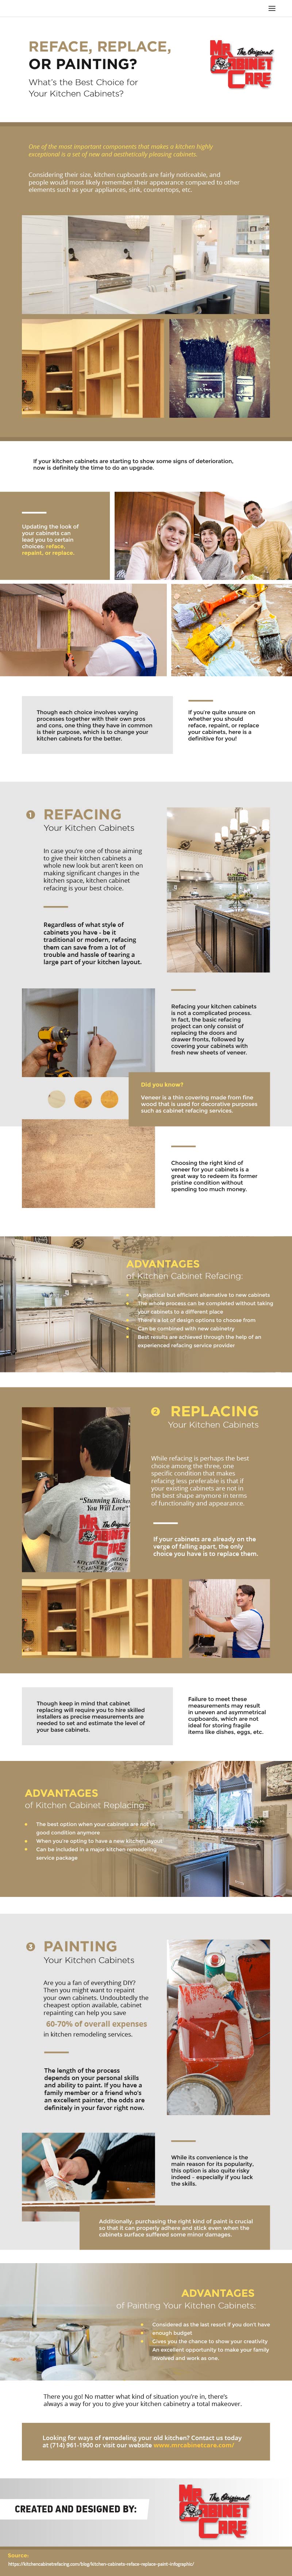 Refacing, Replacing, or Painting? What’s the Best Choice for Your Kitchen Cabinets? - Infographic